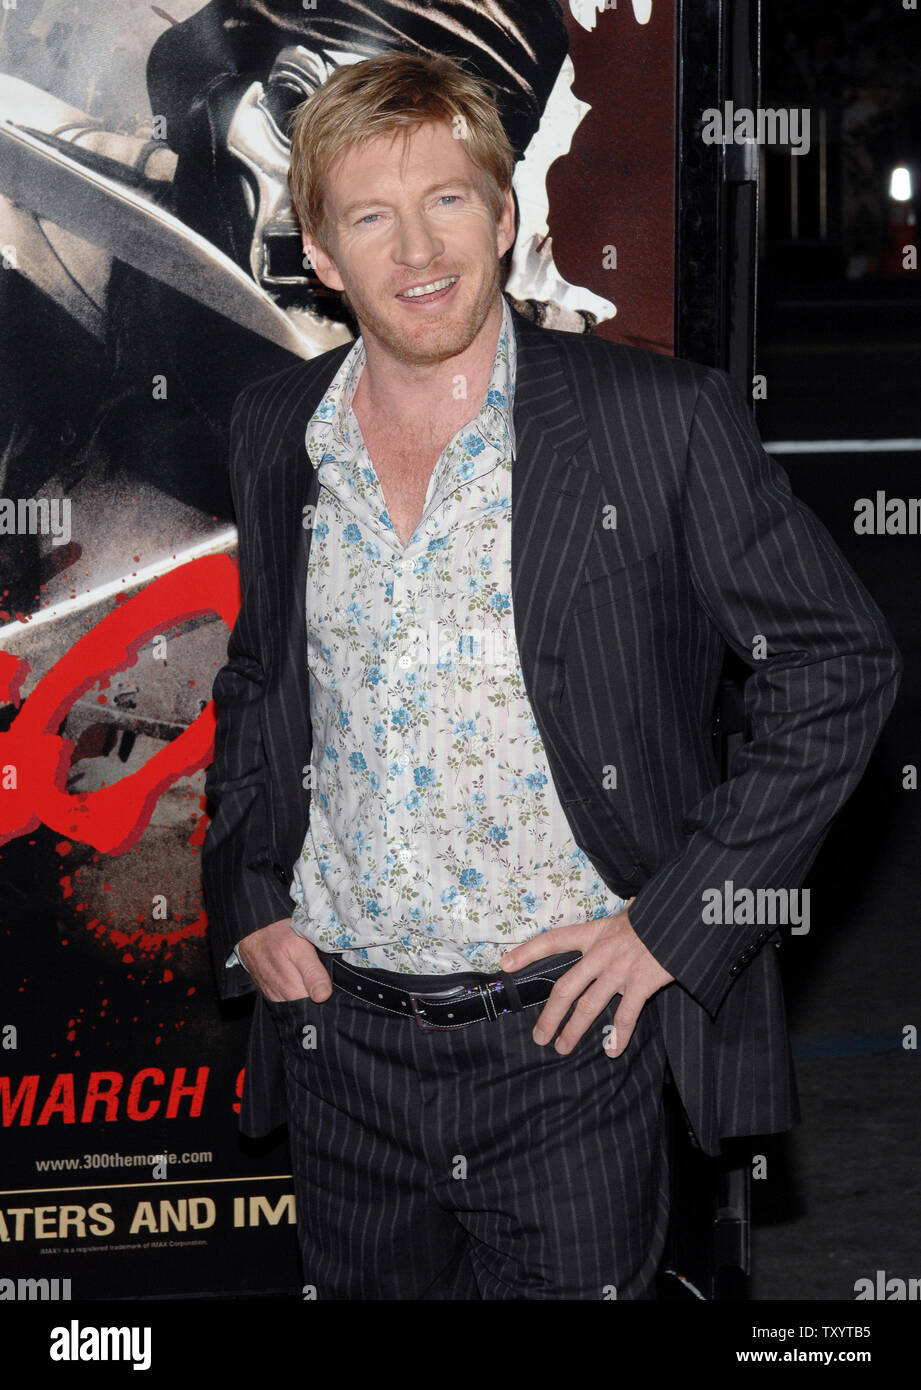 Australian actor David Wenham, who portrays Dilios in the historic adventure drama motion picture '300', arrives for the premiere of the film at Grauman's Chinese Theatre in Los Angeles on March 5, 2007. Based on Frank Miller's graphic novel, '300' concerns the 480 B.C Battle of Thermopylae, where the King of Sparta led his army against the advancing Persians. (UPI Photo/Jim Ruymen) Stock Photo